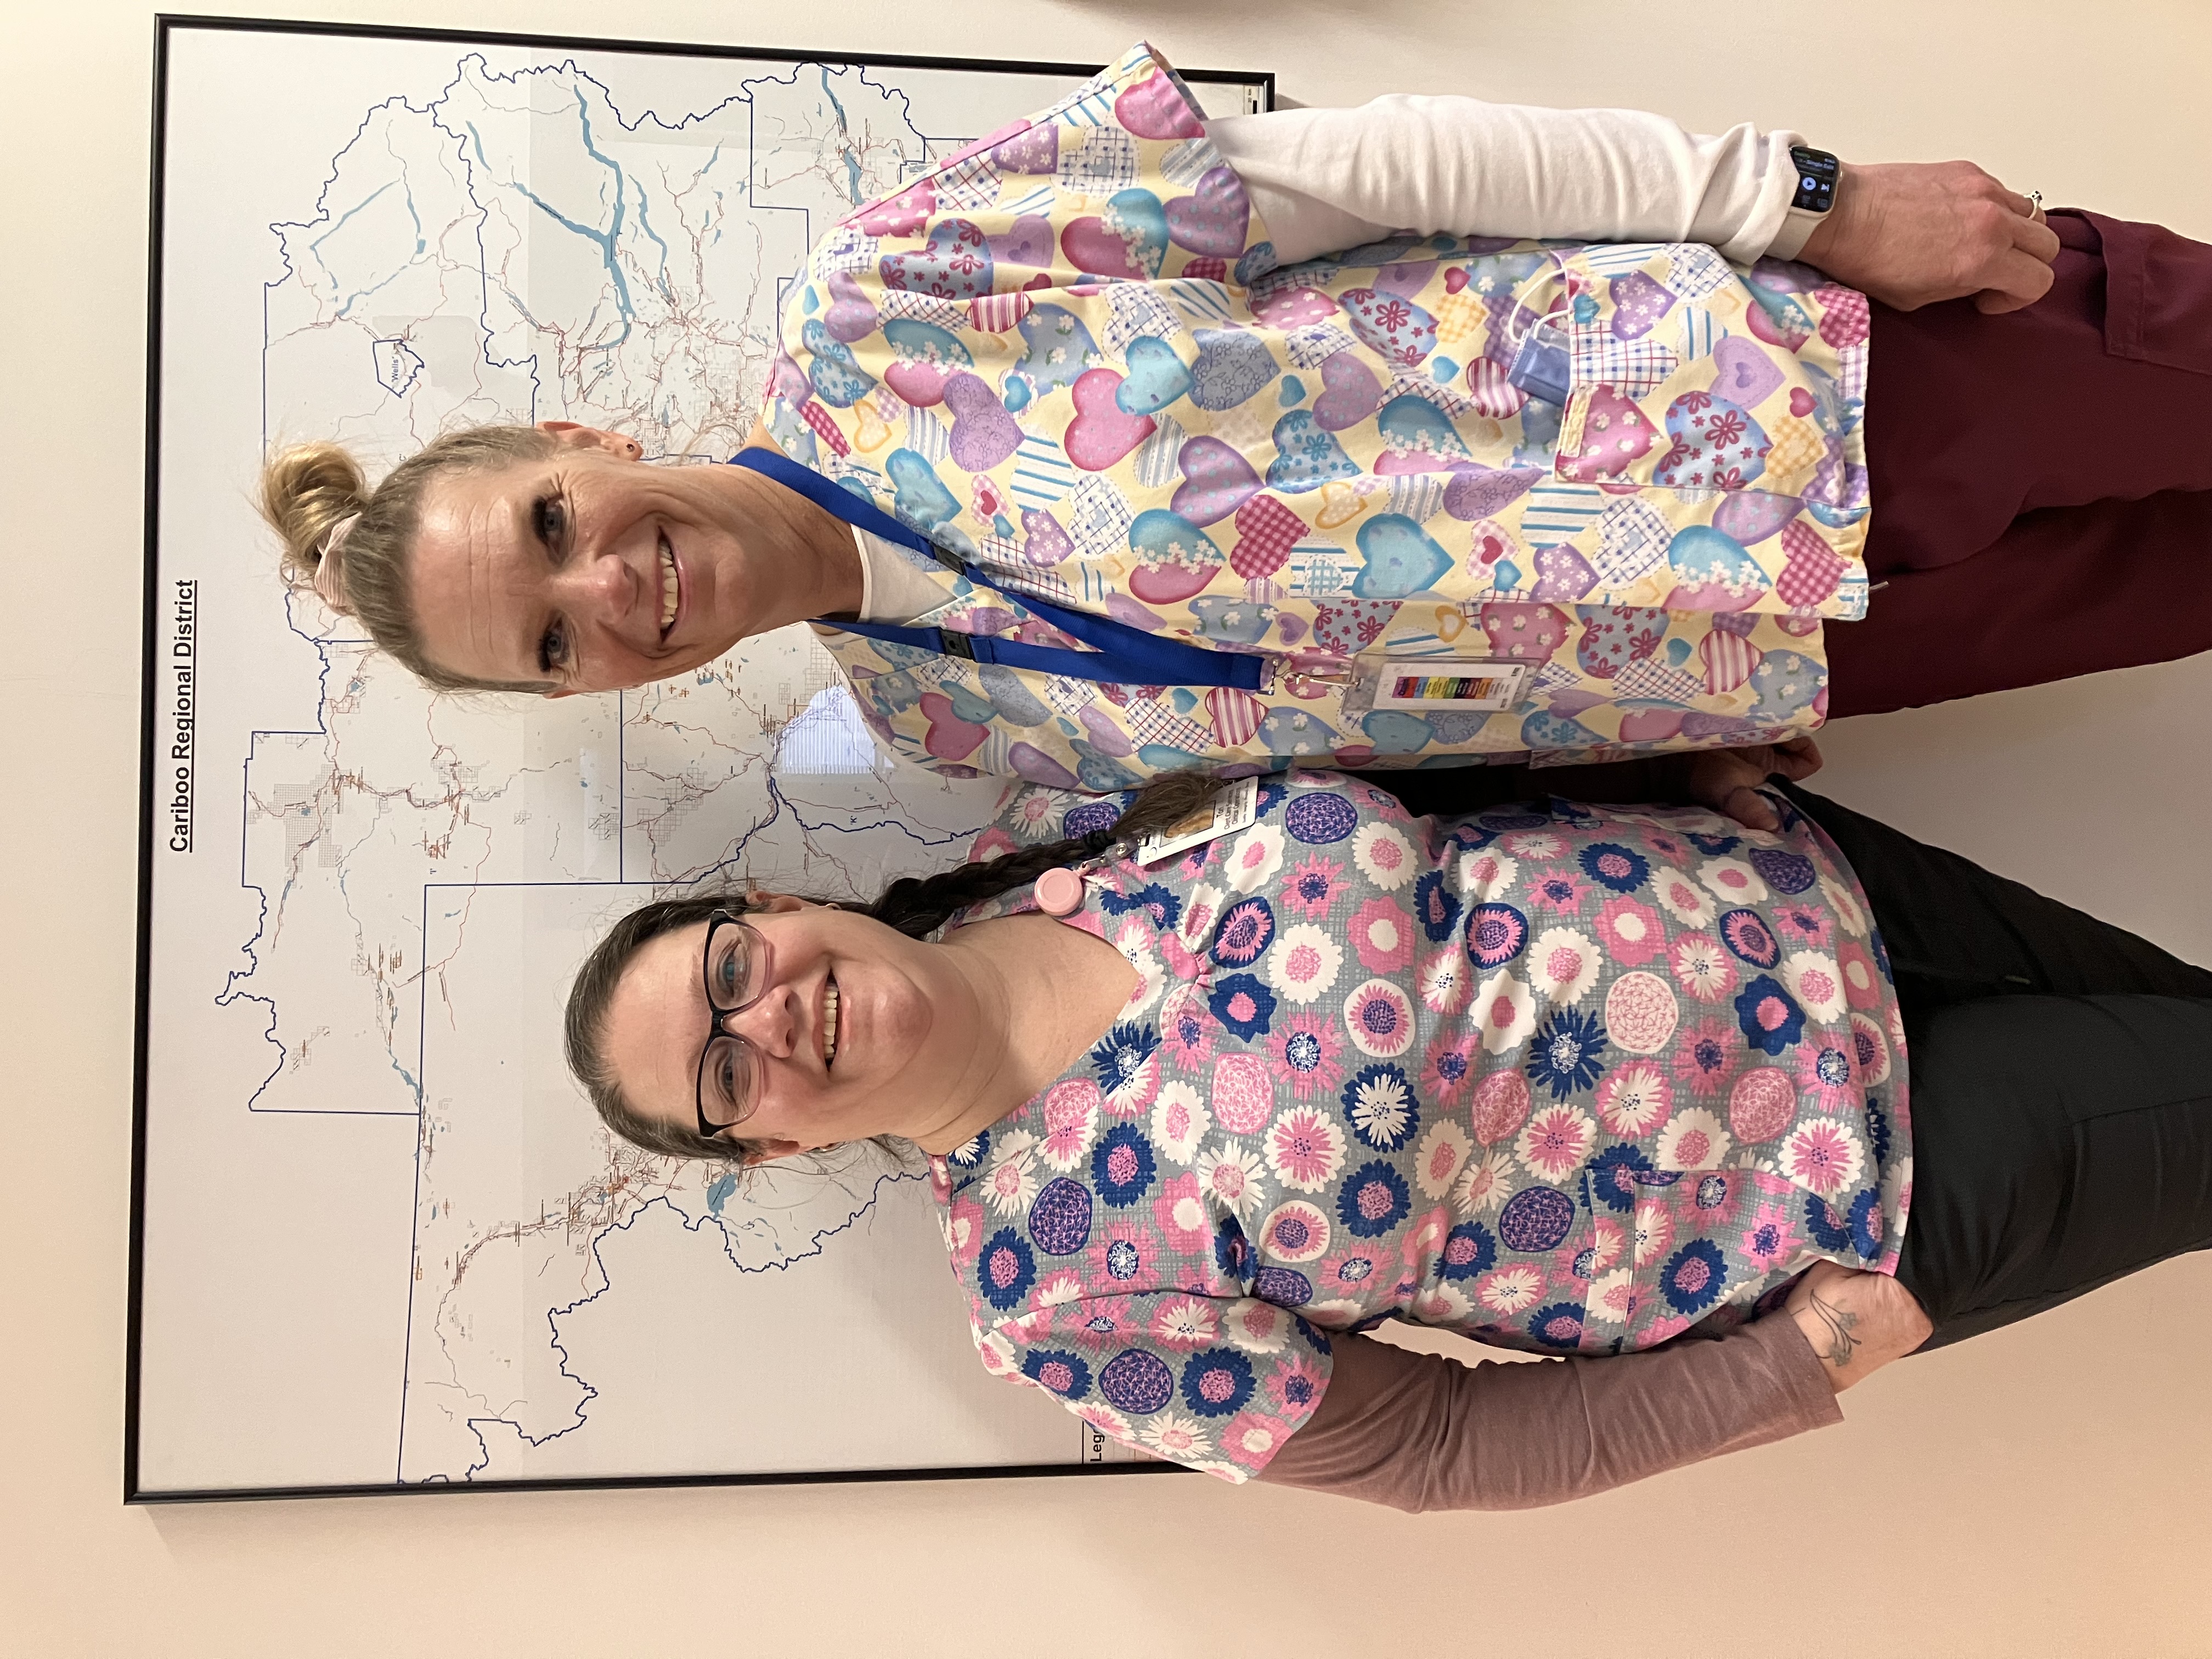 Two women in colourful medical clothing stand in front of a map